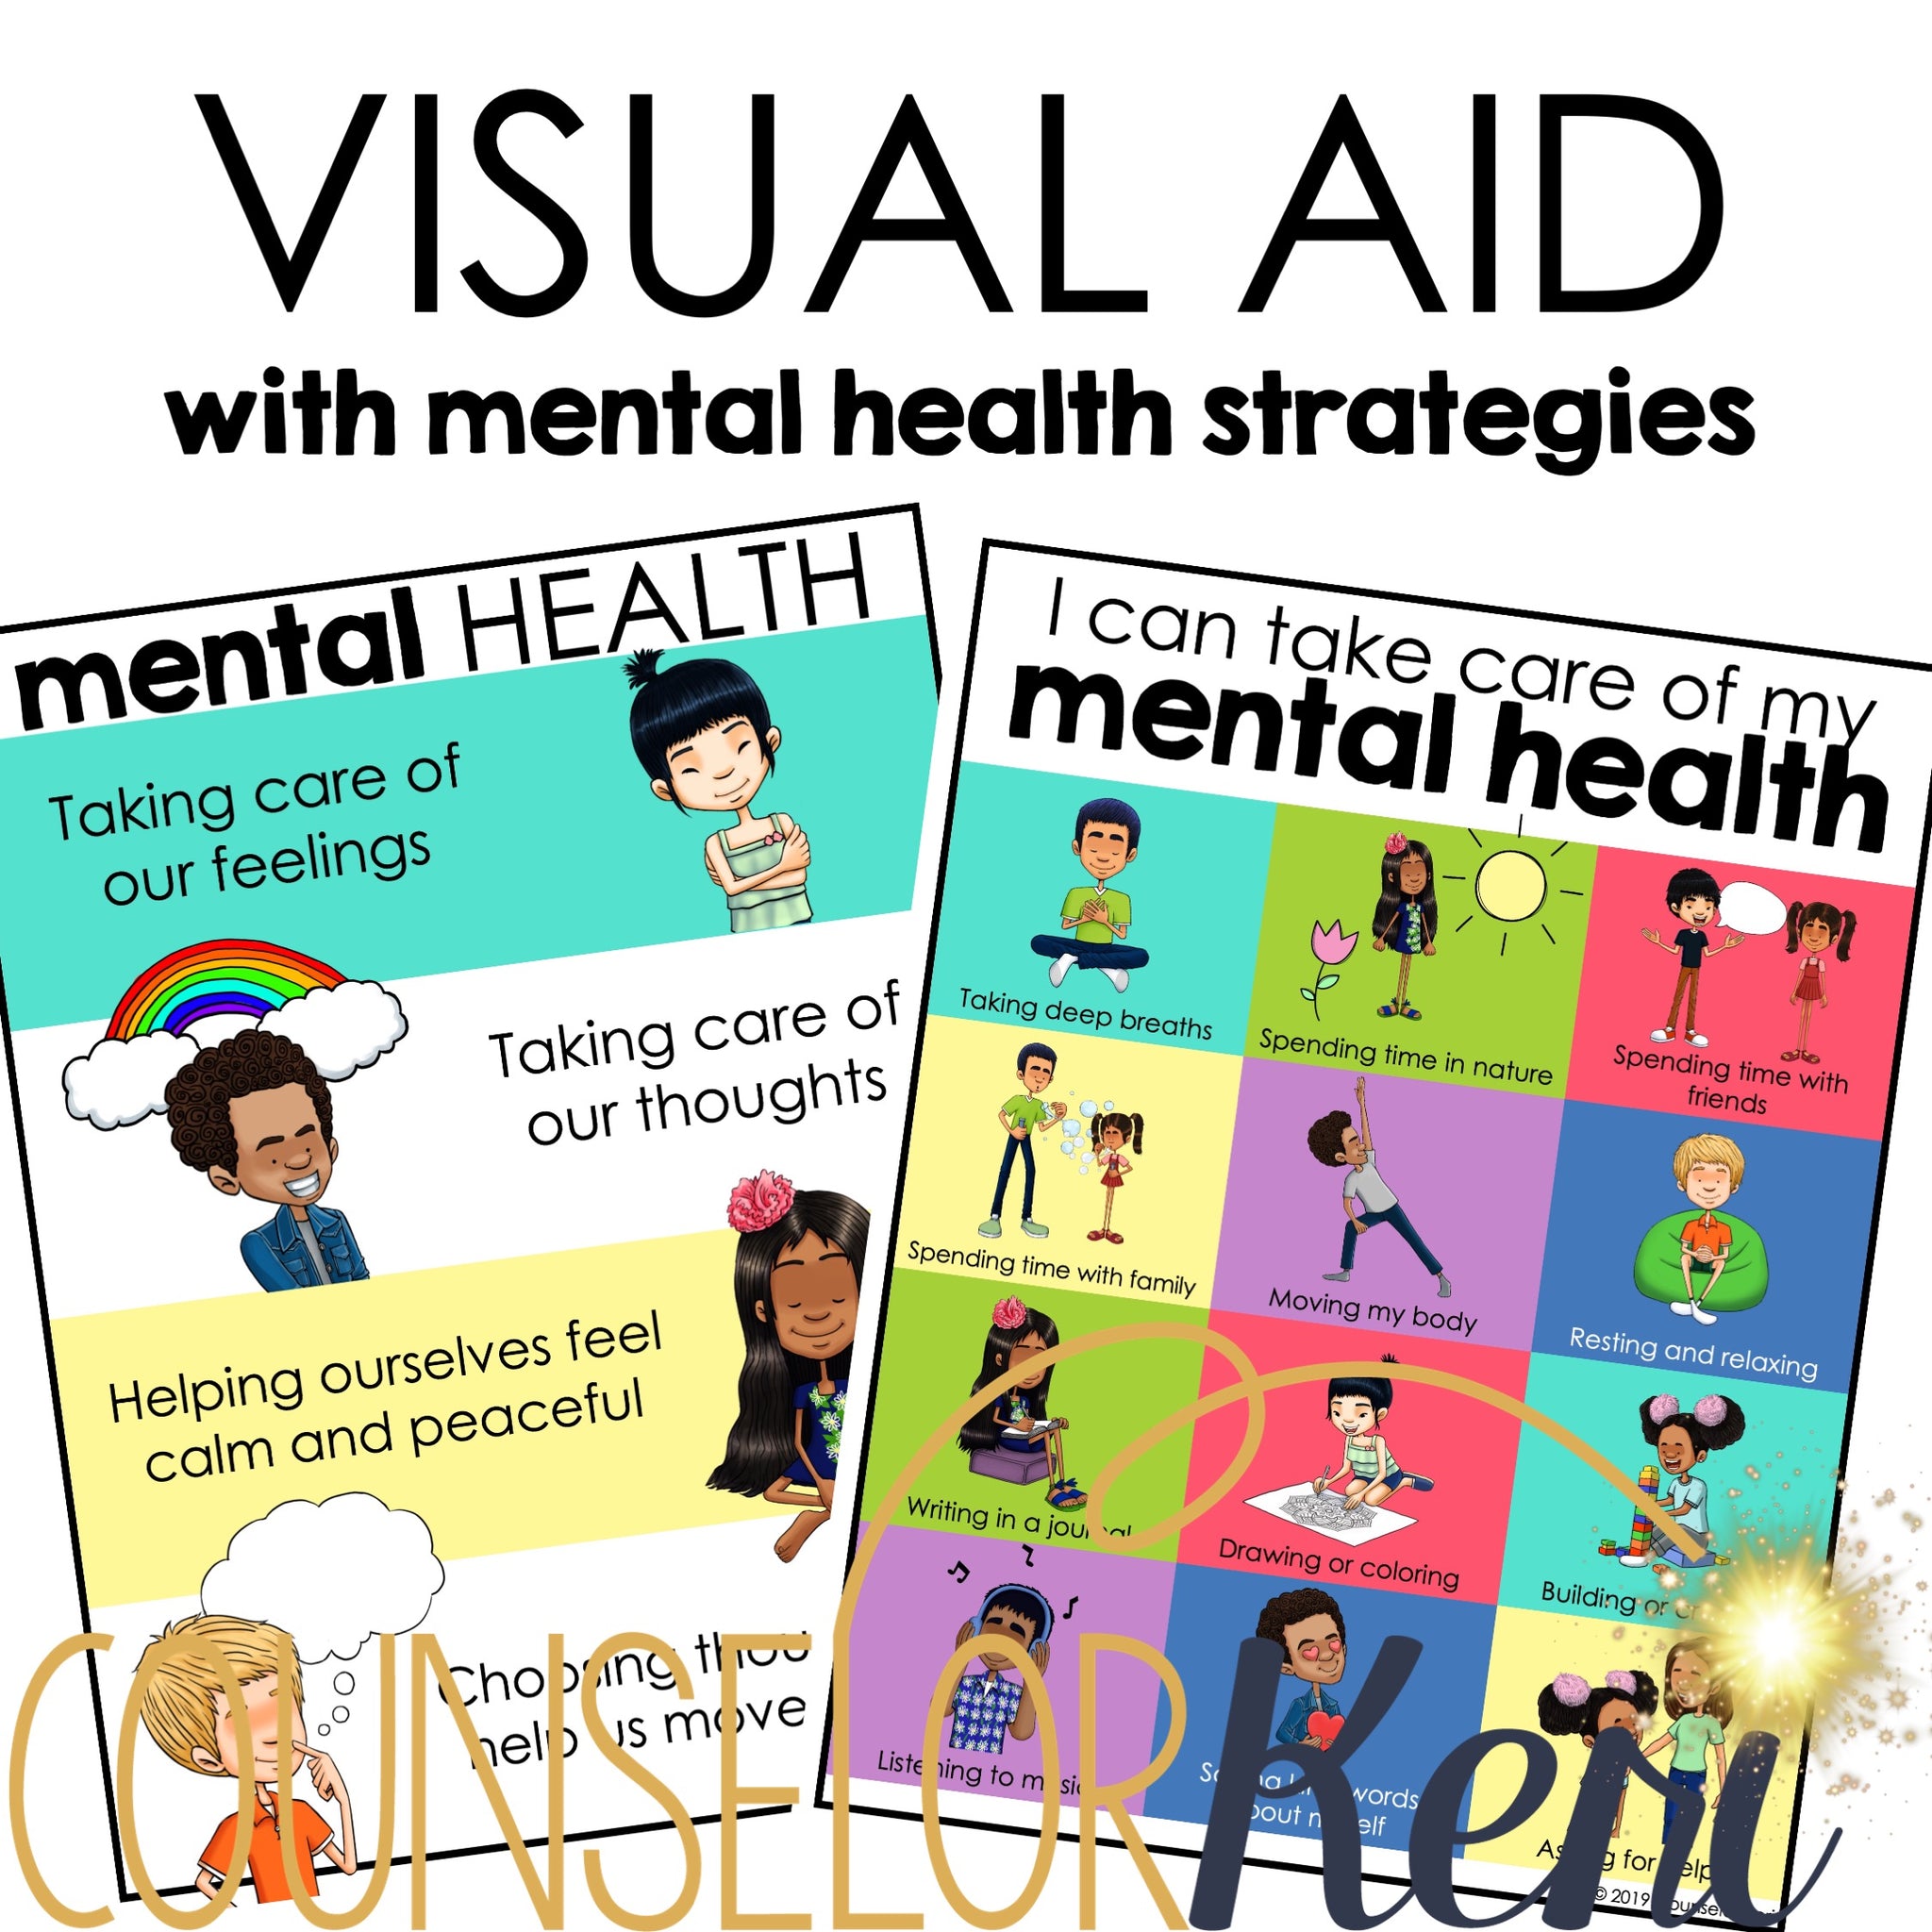 Mental Health Counseling Lesson Plan: Mental Health Activity for K-1 ...